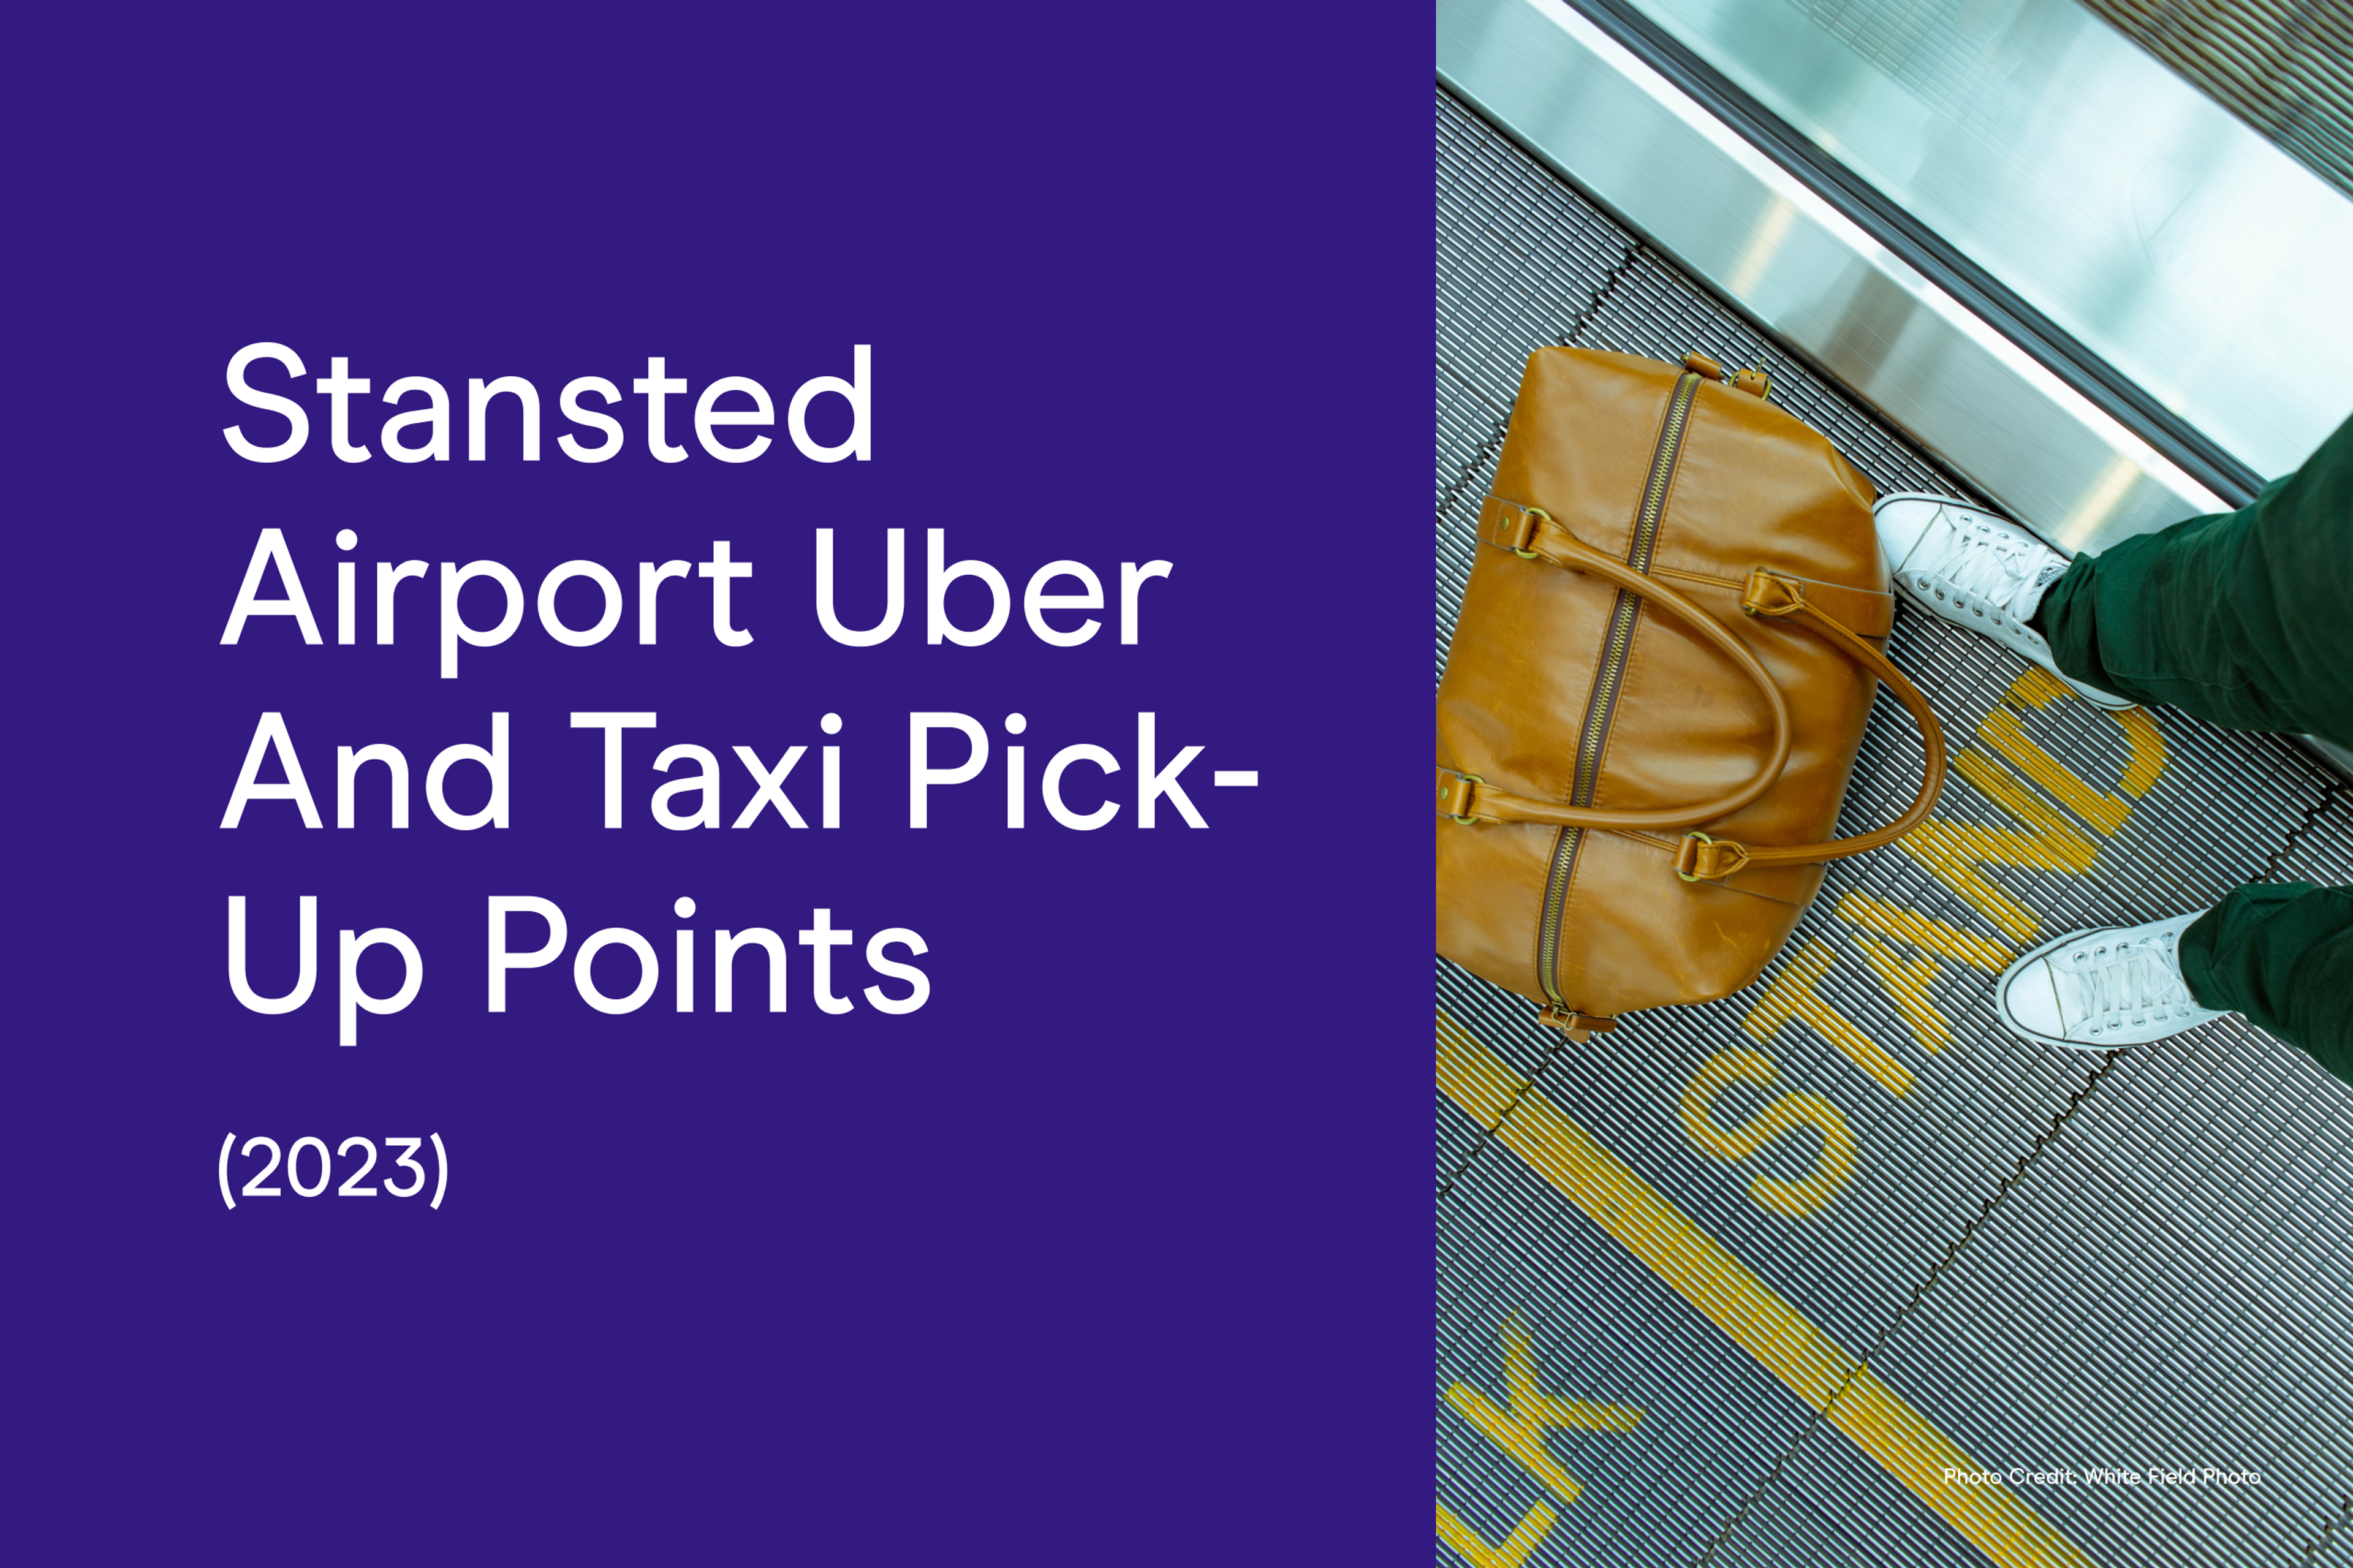 Stanstead Airport Uber and taxi pick up points